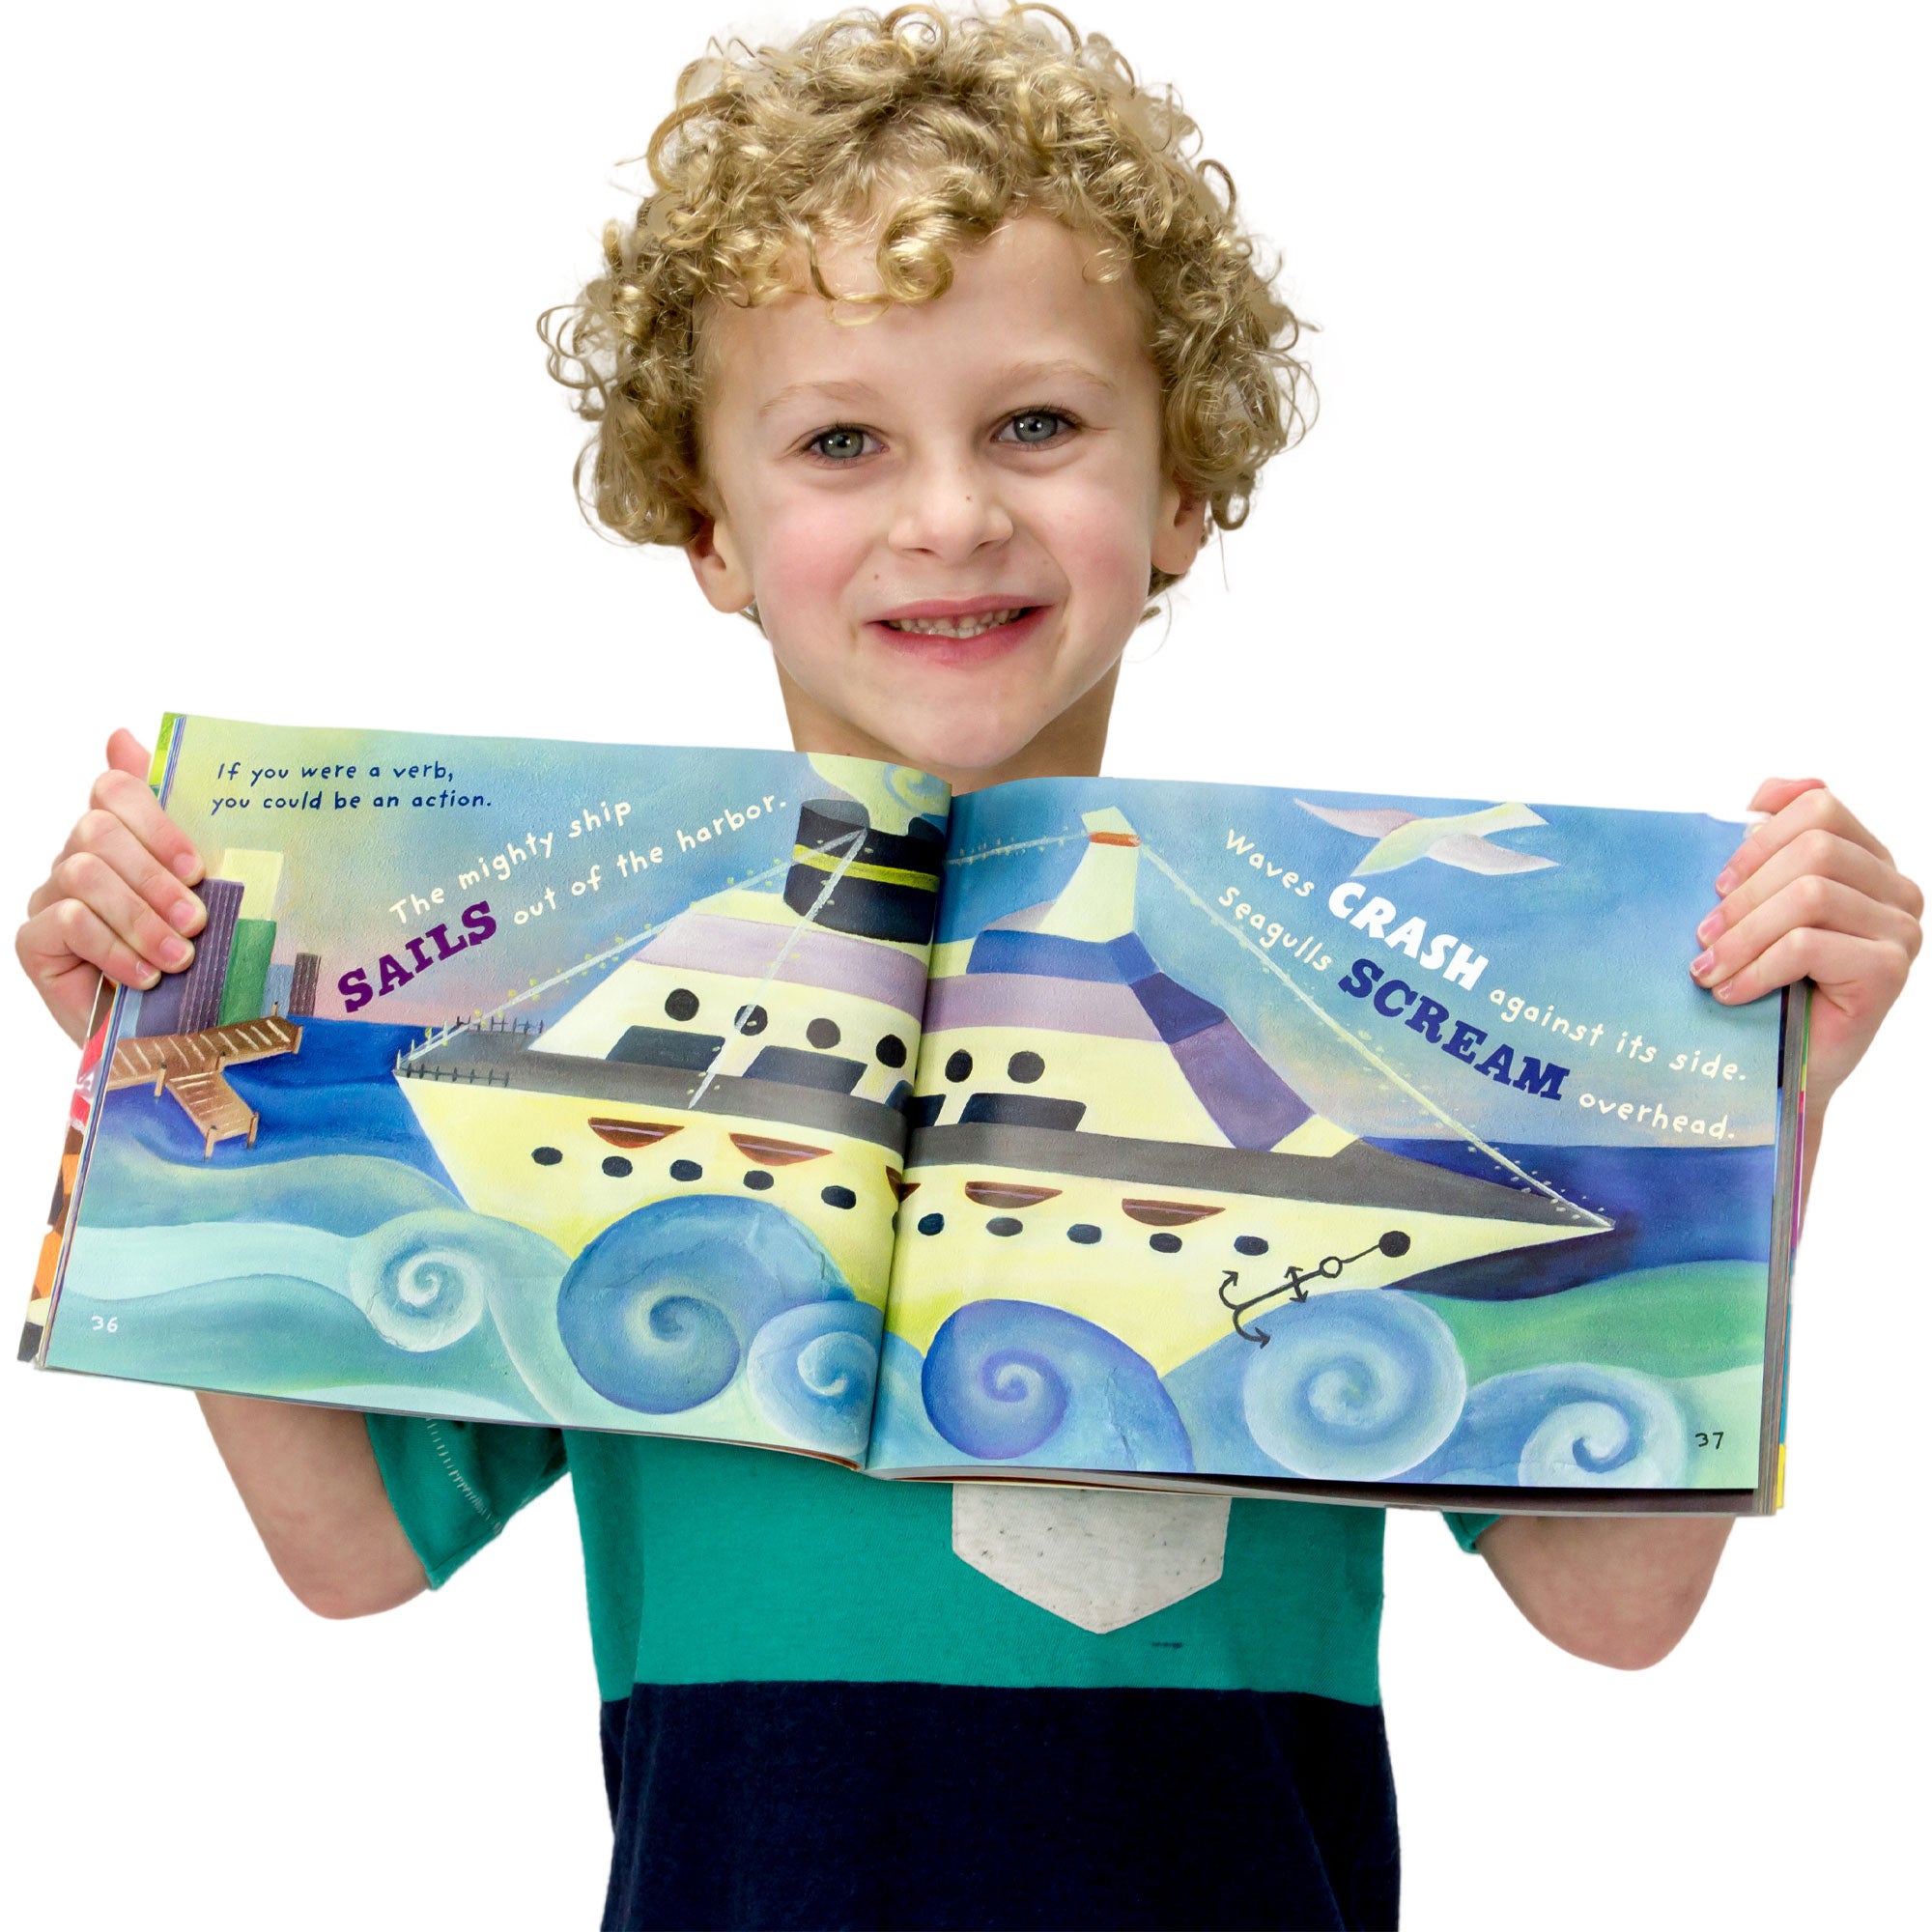 A young, curly-haired, blonde boy is smiling and holding open the Word Fun book to show inside pages. The pages show a large boat, just leaving a city dock, with waves splashing. The text on the pages reads “If you were a verb, you could be an action. The mighty ship sails out of the harbor. Waves crash against its side. Seagulls scream overhead.” The verbs are large, bold, and colored differently than the rest of the text.